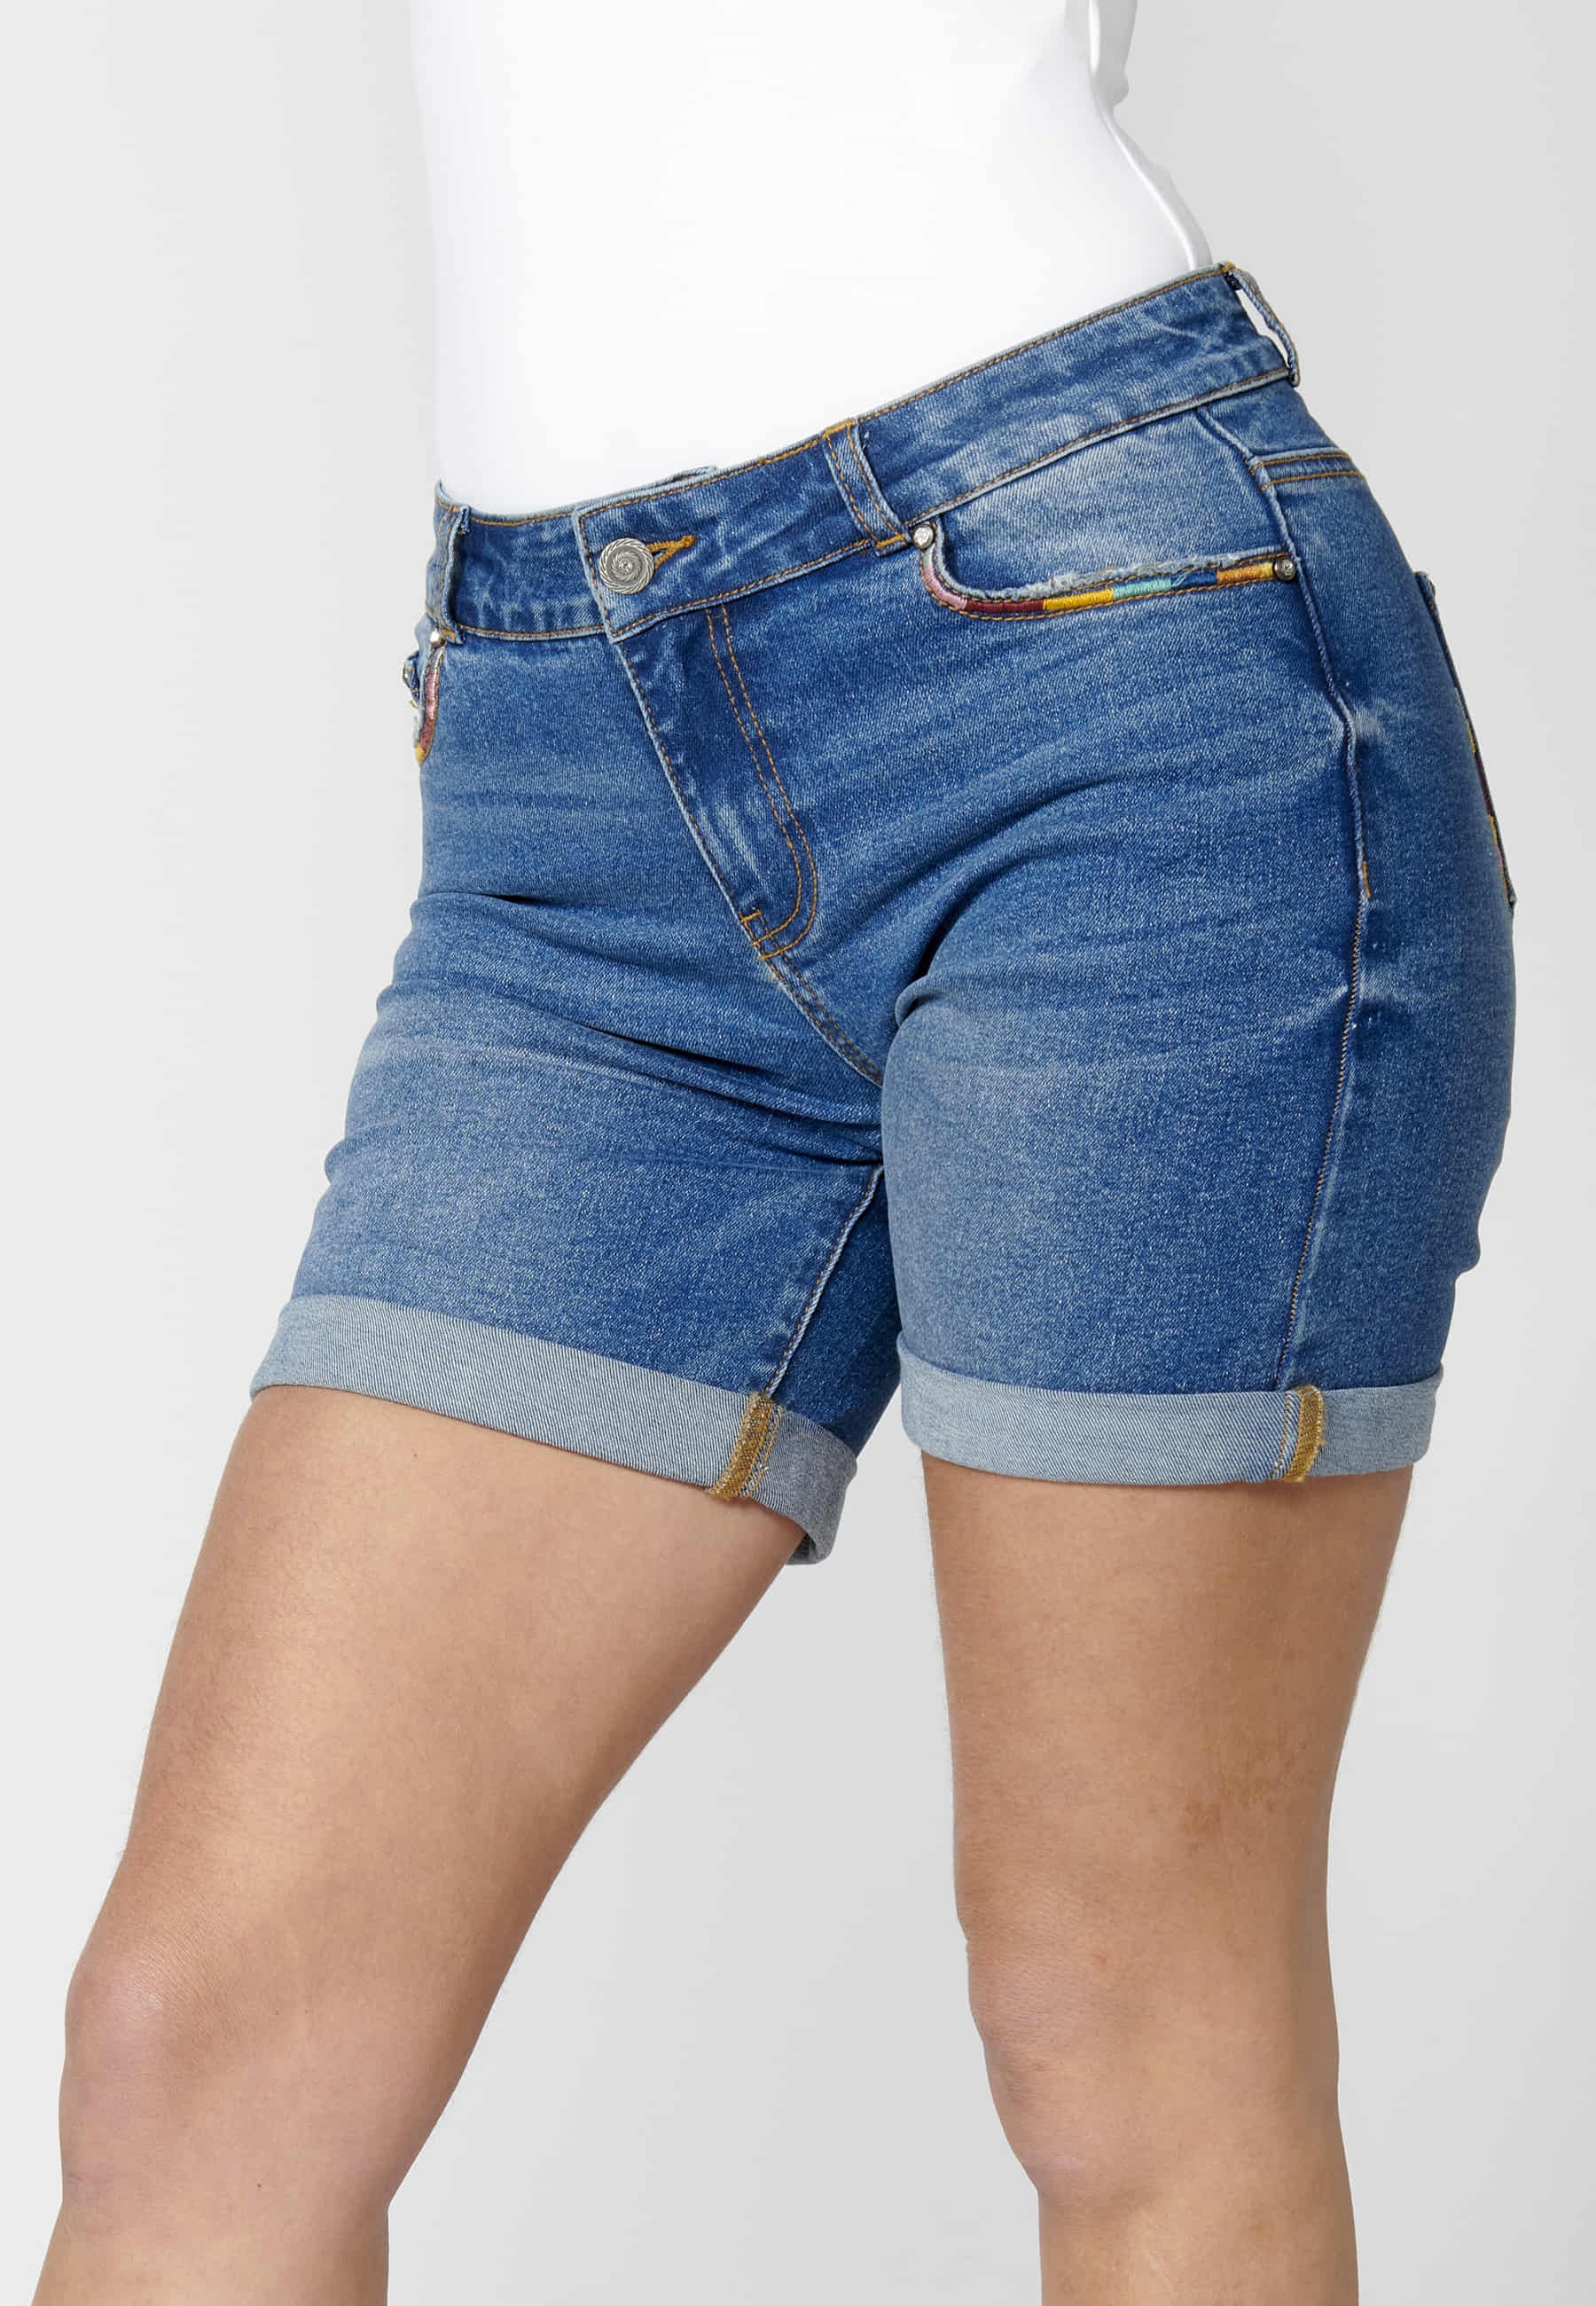 Blue turn-up shorts for Woman